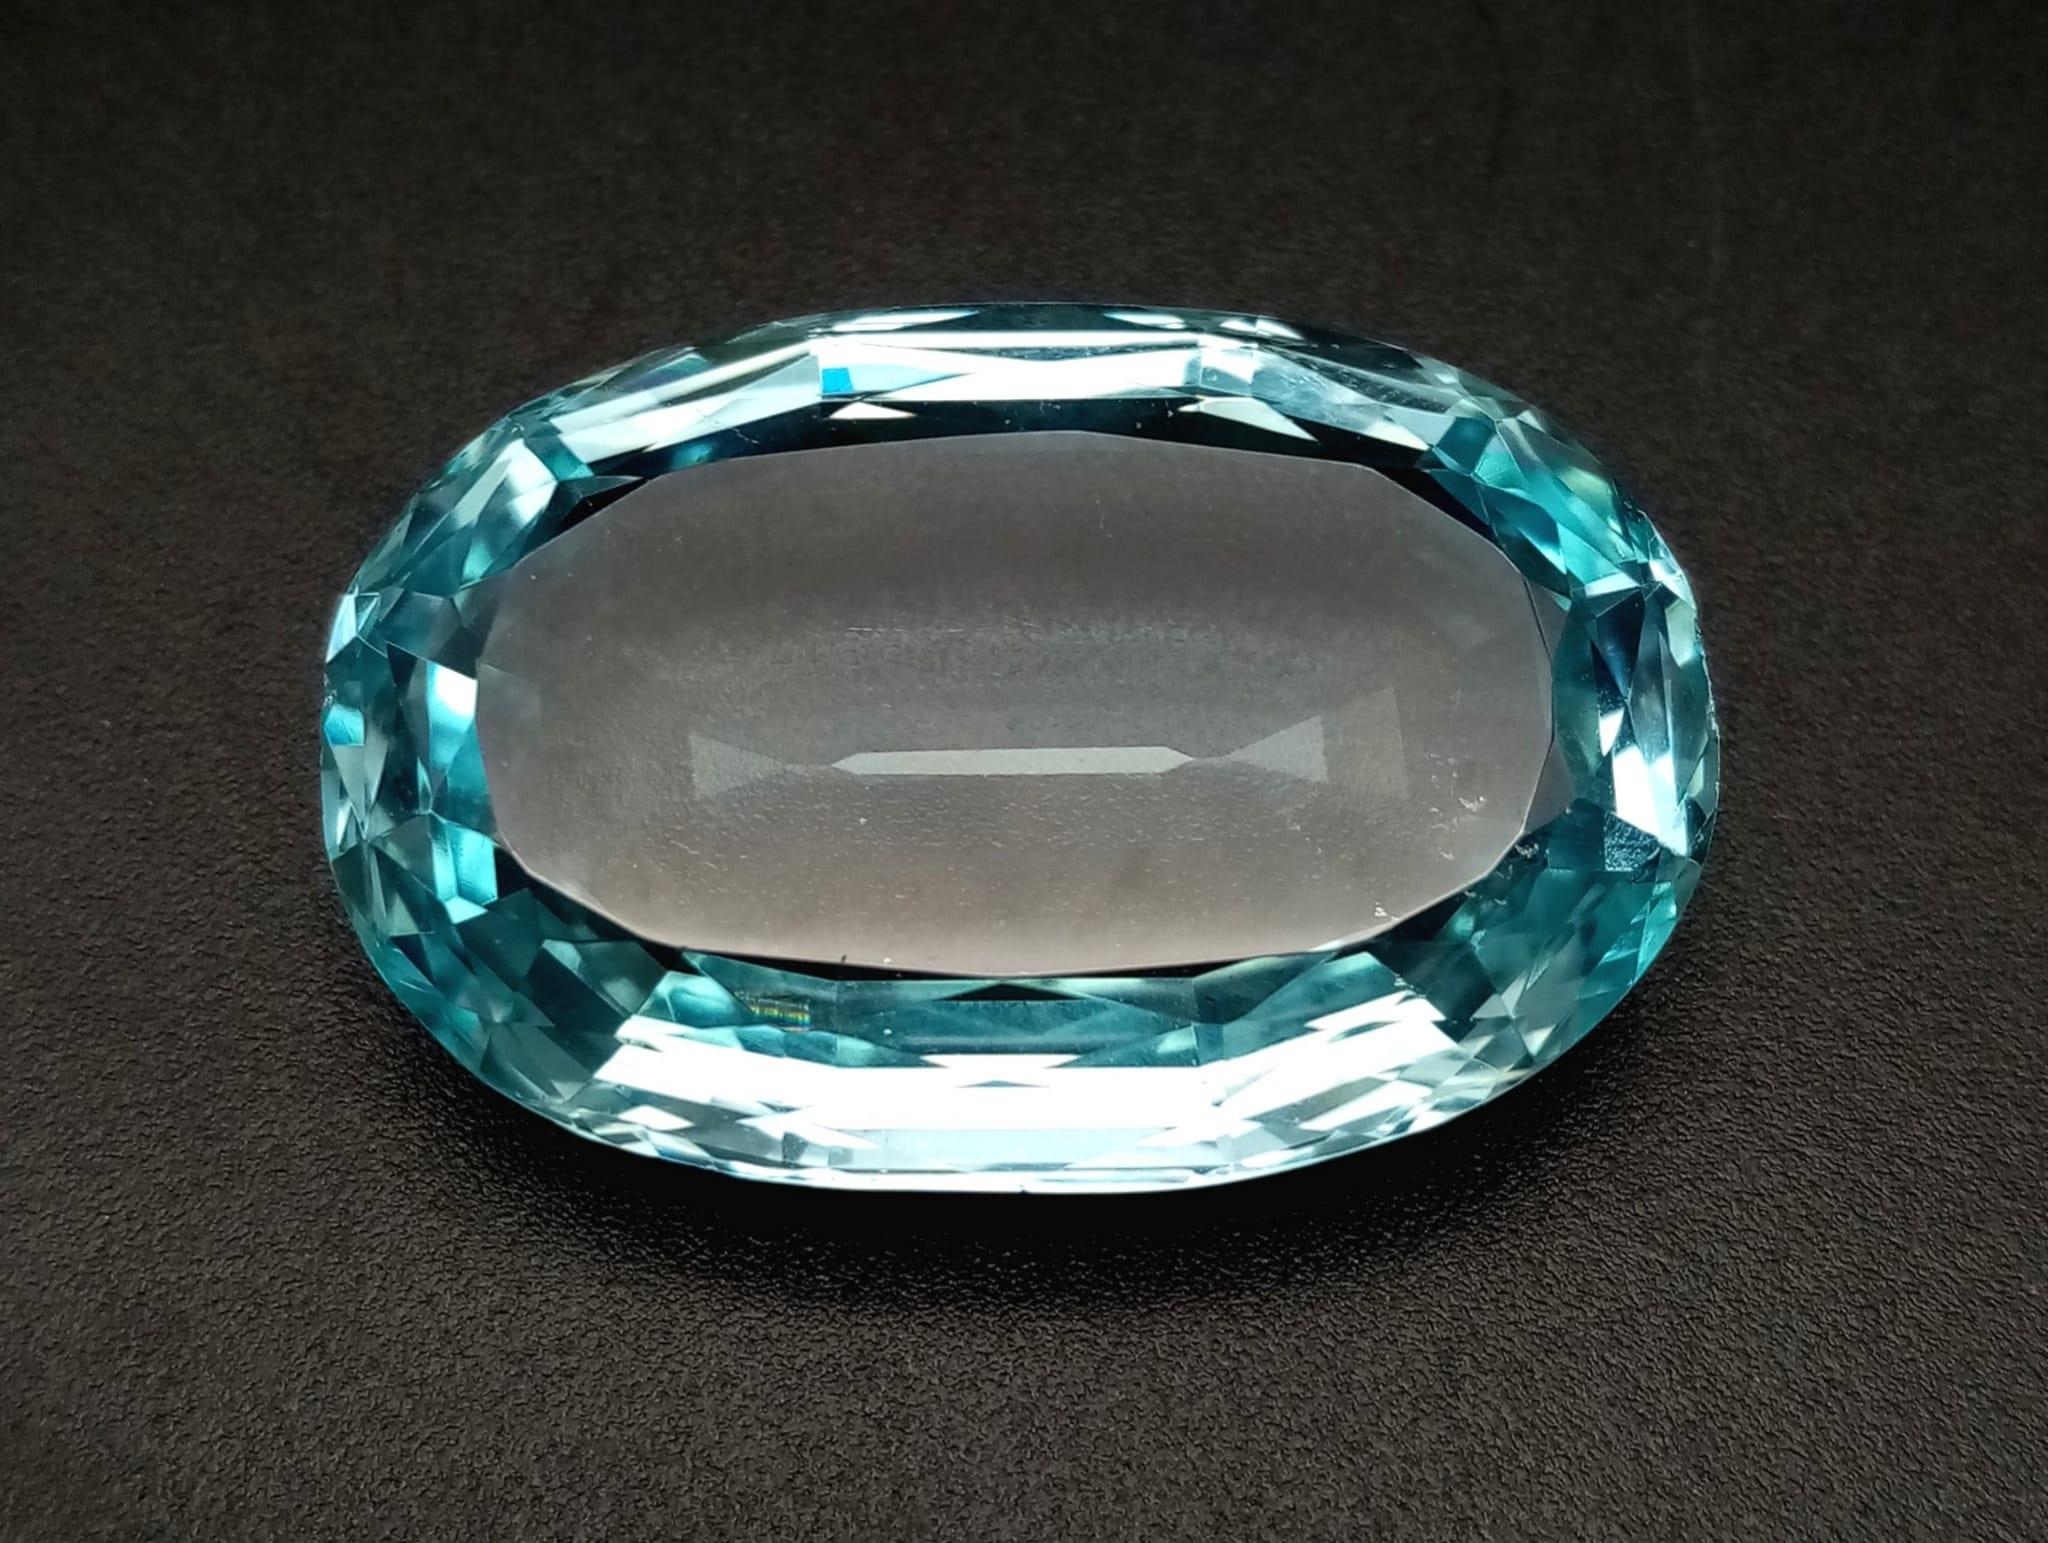 A 53.2ct Oval Aquamarine Gemstone. No visible inclusions to the naked eye. 10.68g.